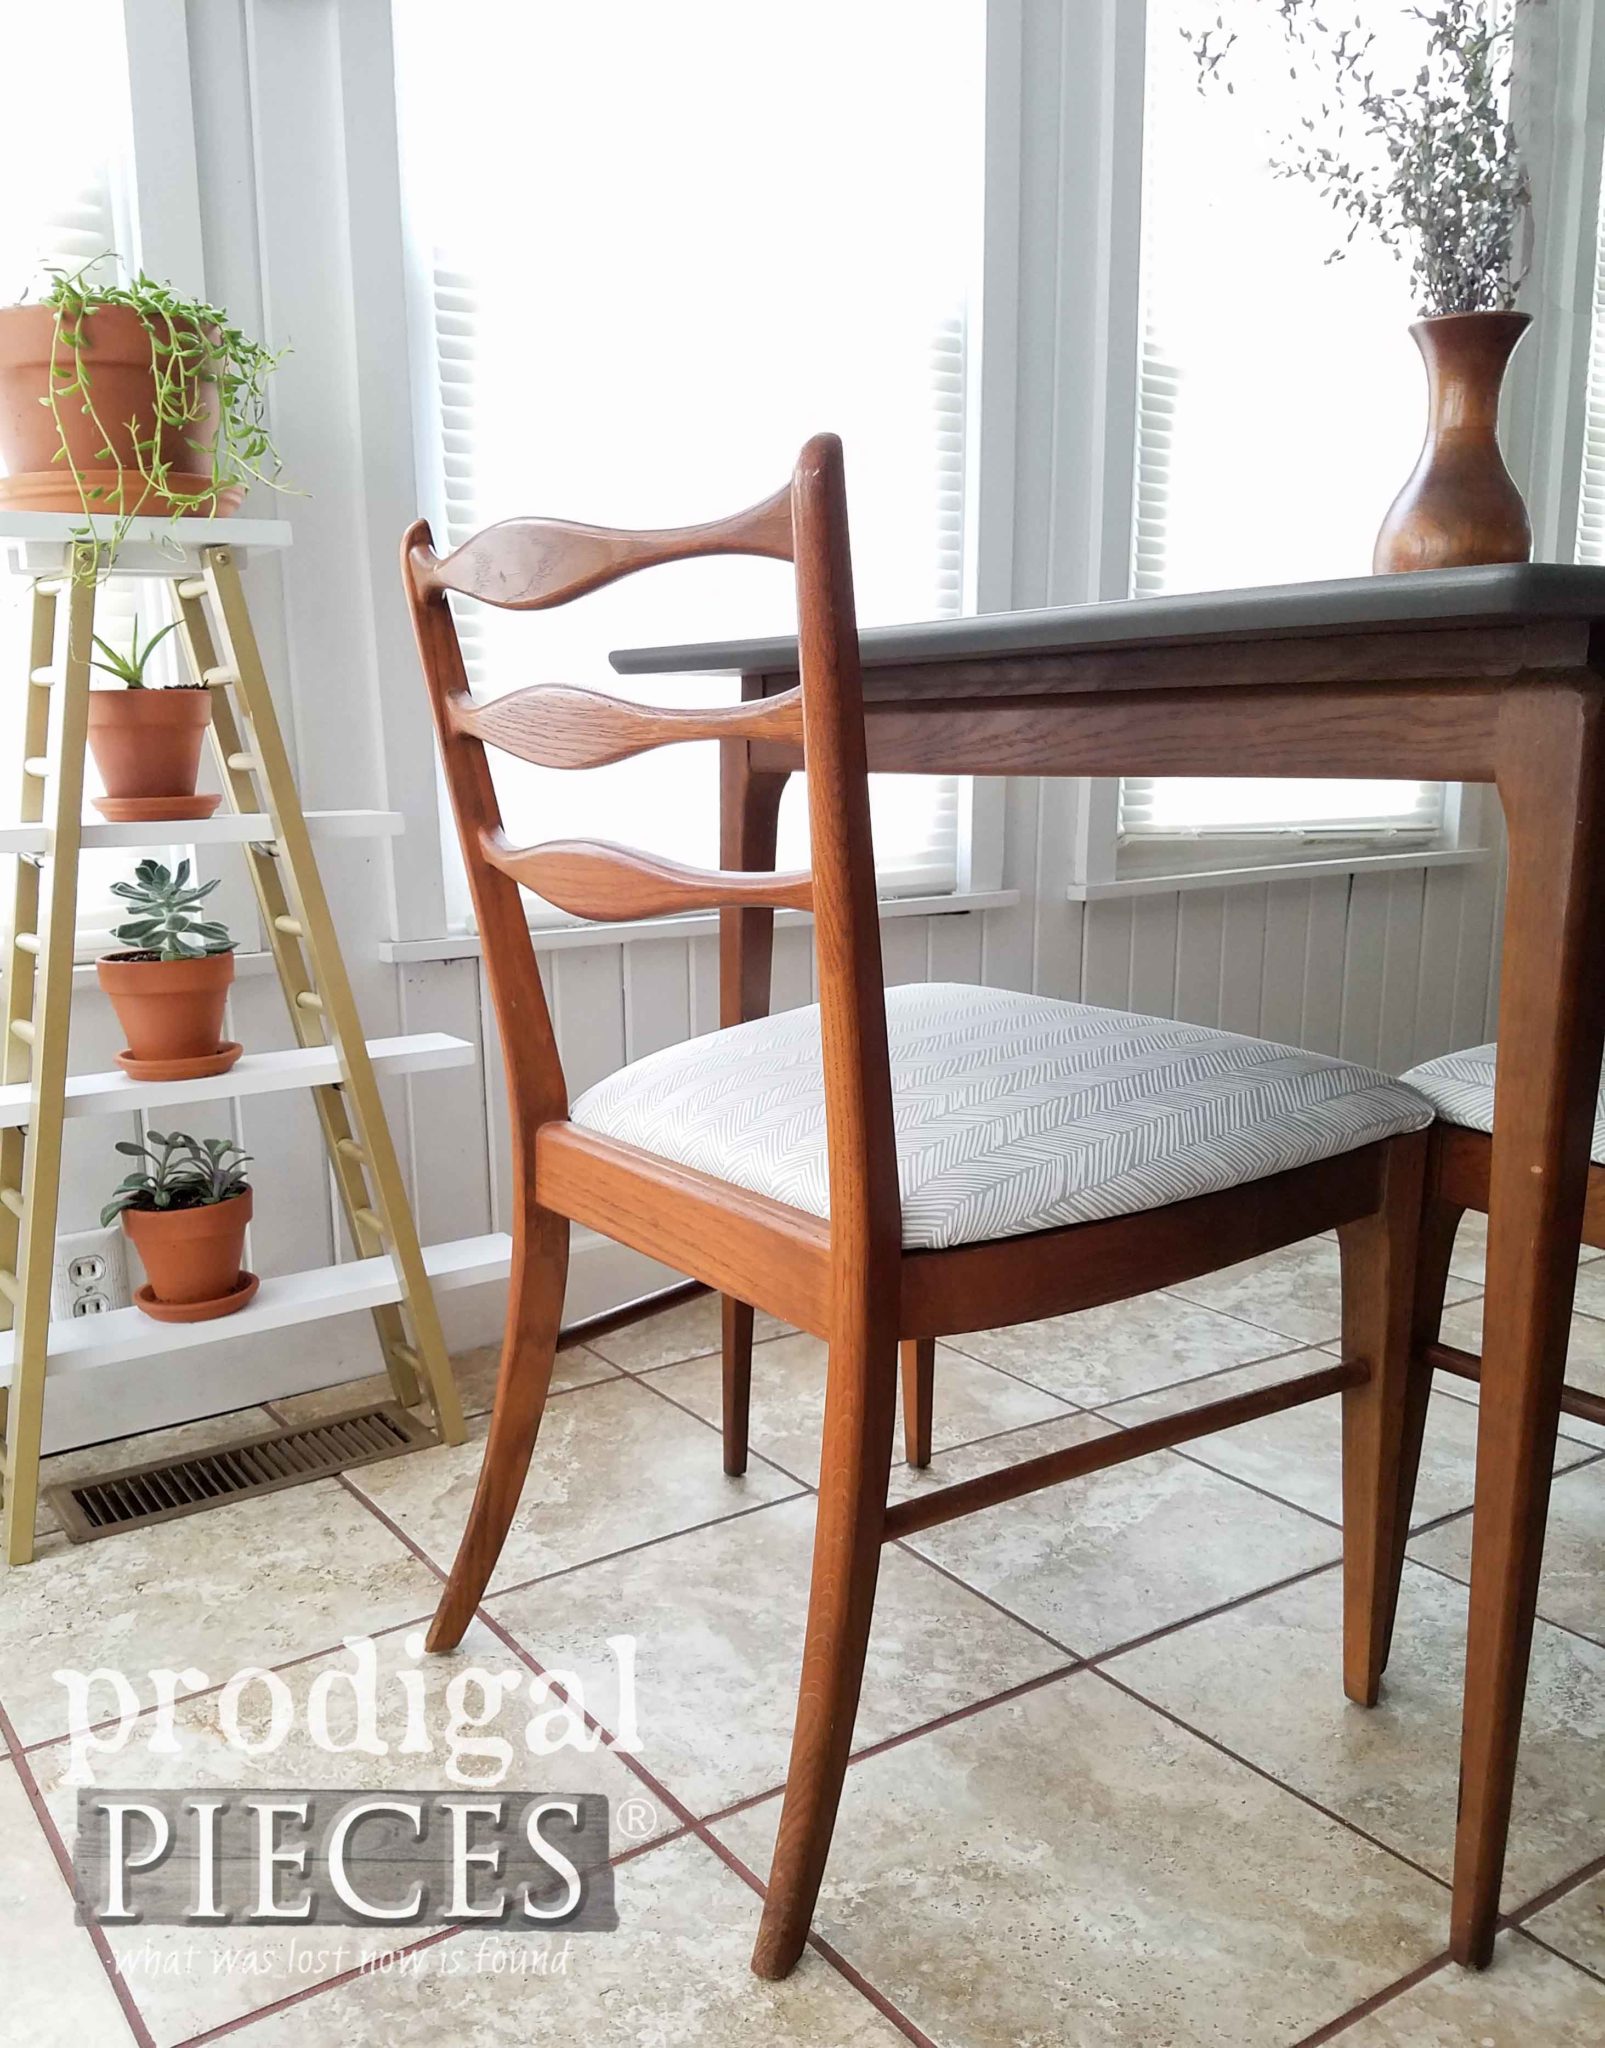 Vintage Mid Century Dining Chair with Updated Upholstery | How to Paint Laminate Furniture by by Prodigal Pieces | prodigalpieces.com